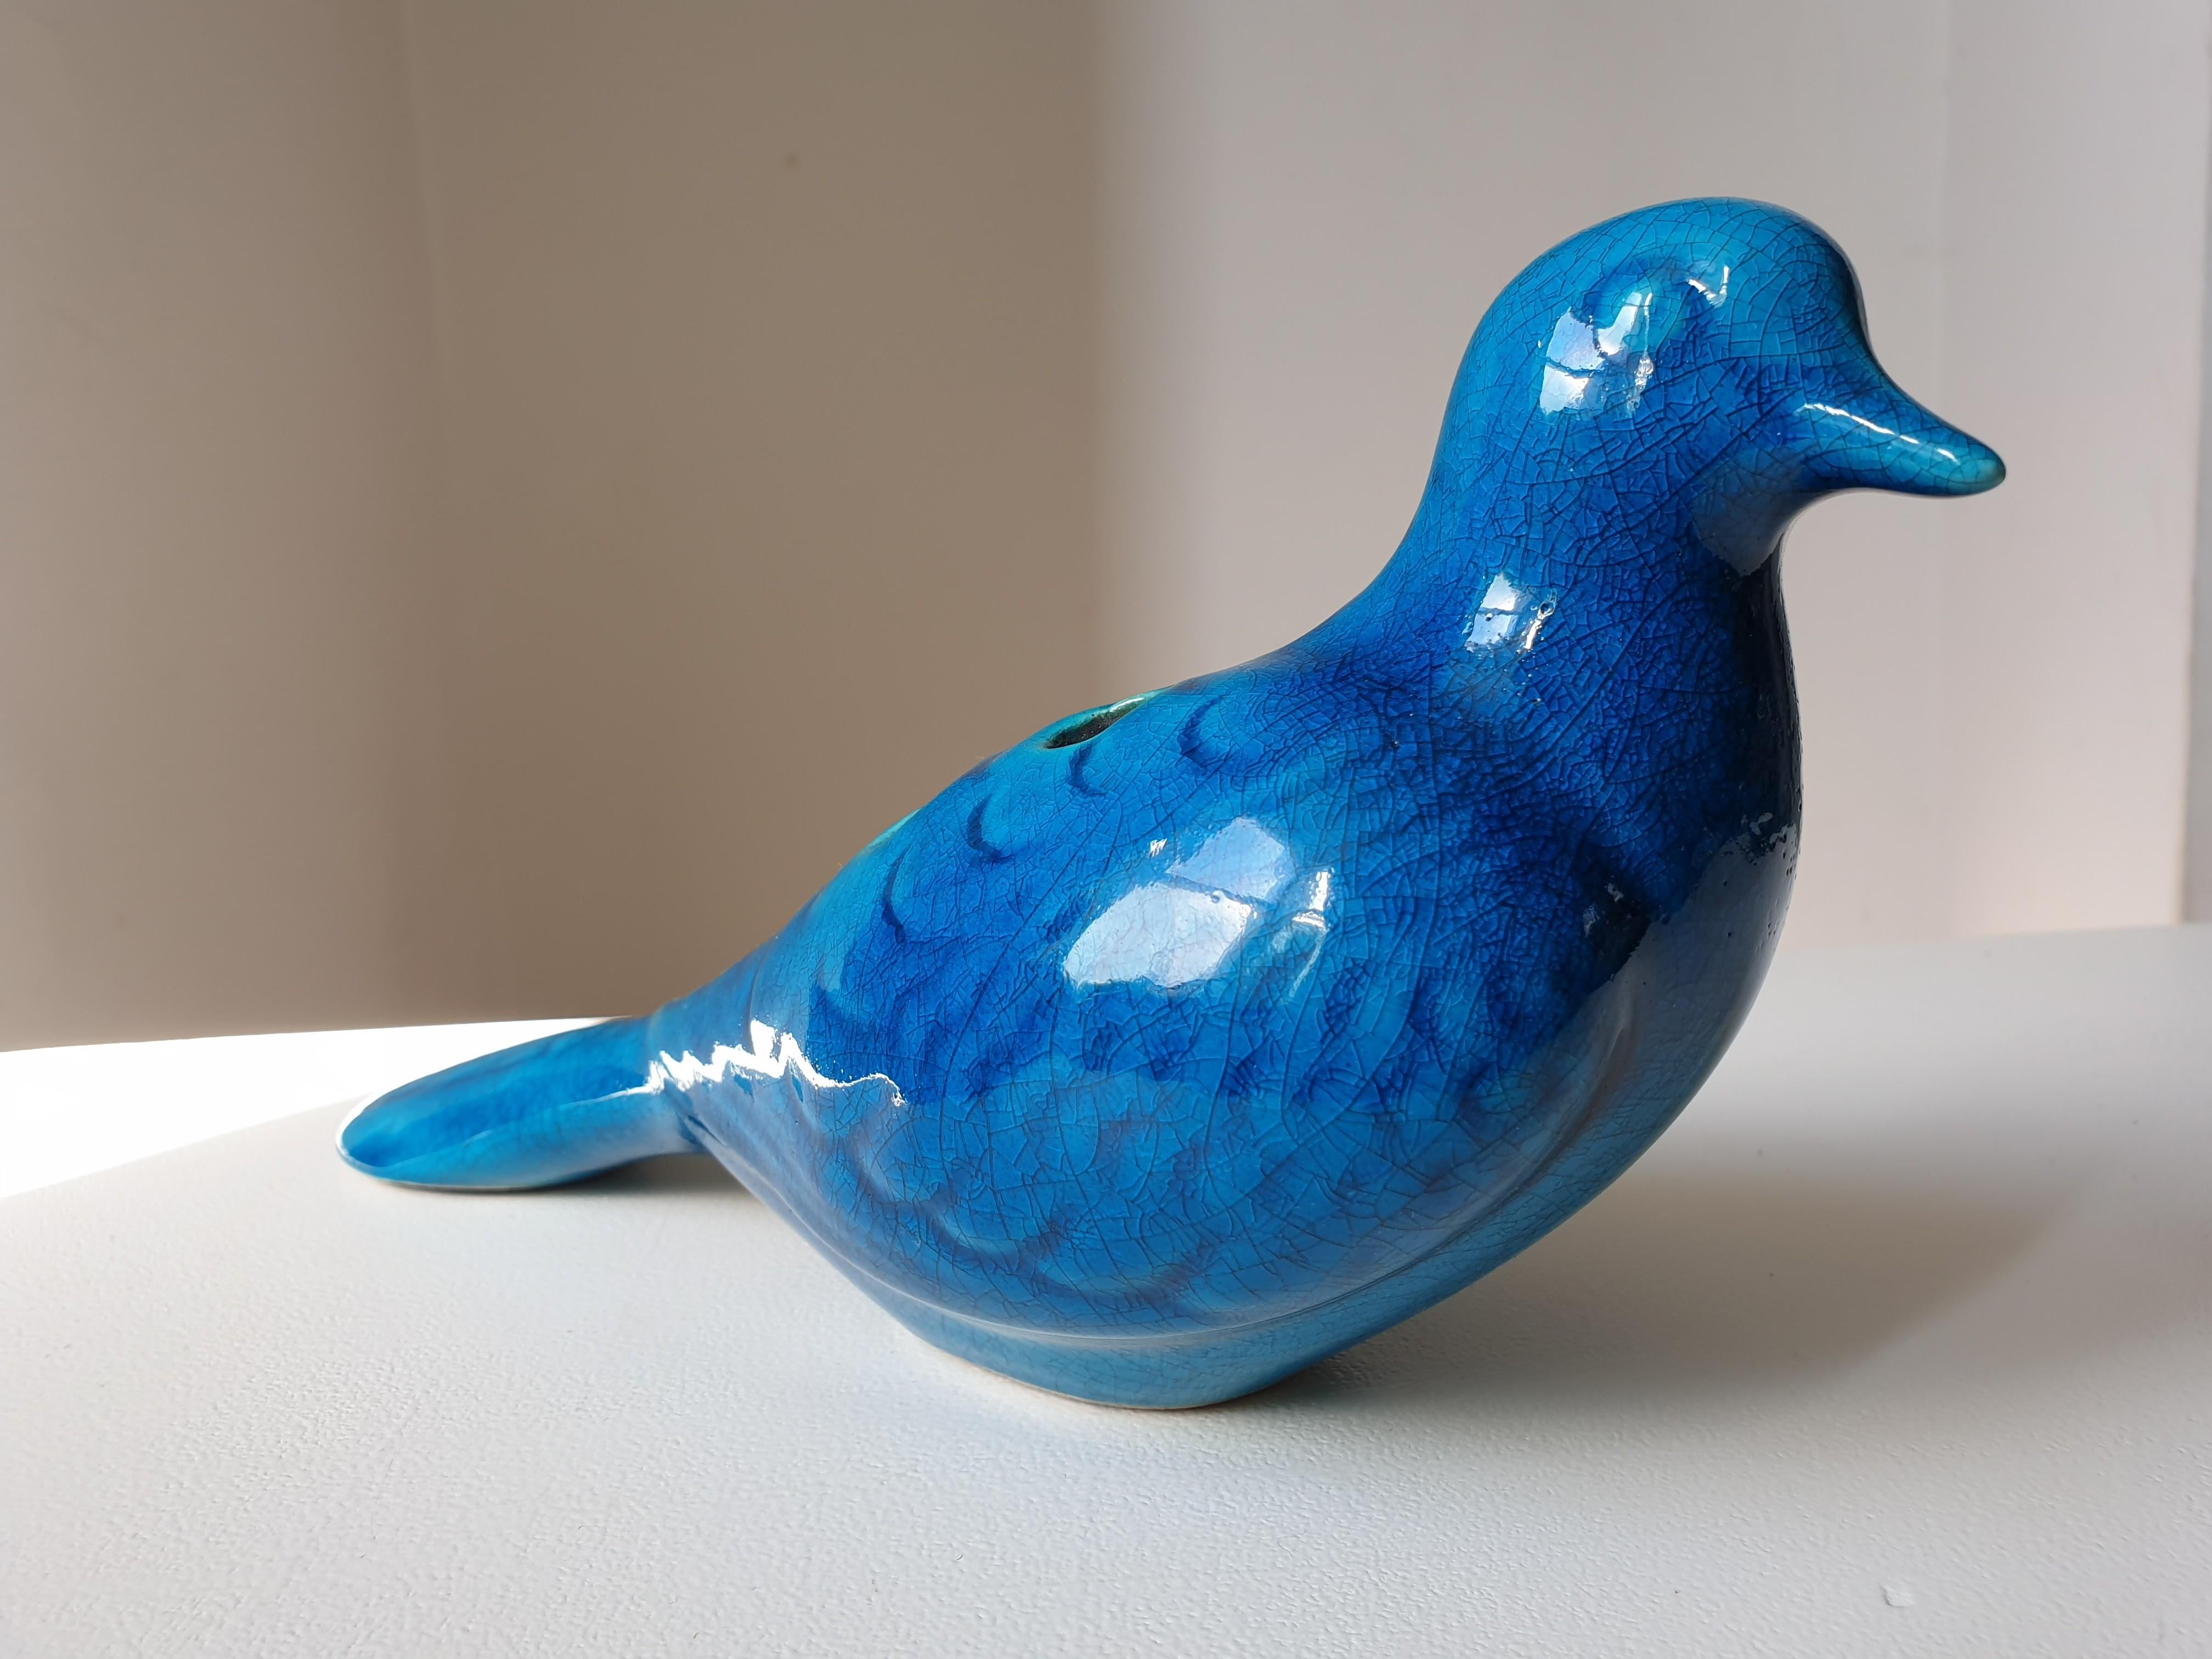 Glazed ceramic pigeon with a crackle glazed finish by the celebrated French ceramicist Pol Chambost. Signed to base. There are openings in the back for sprigs of flowers making it ideal to use as a table decoration.